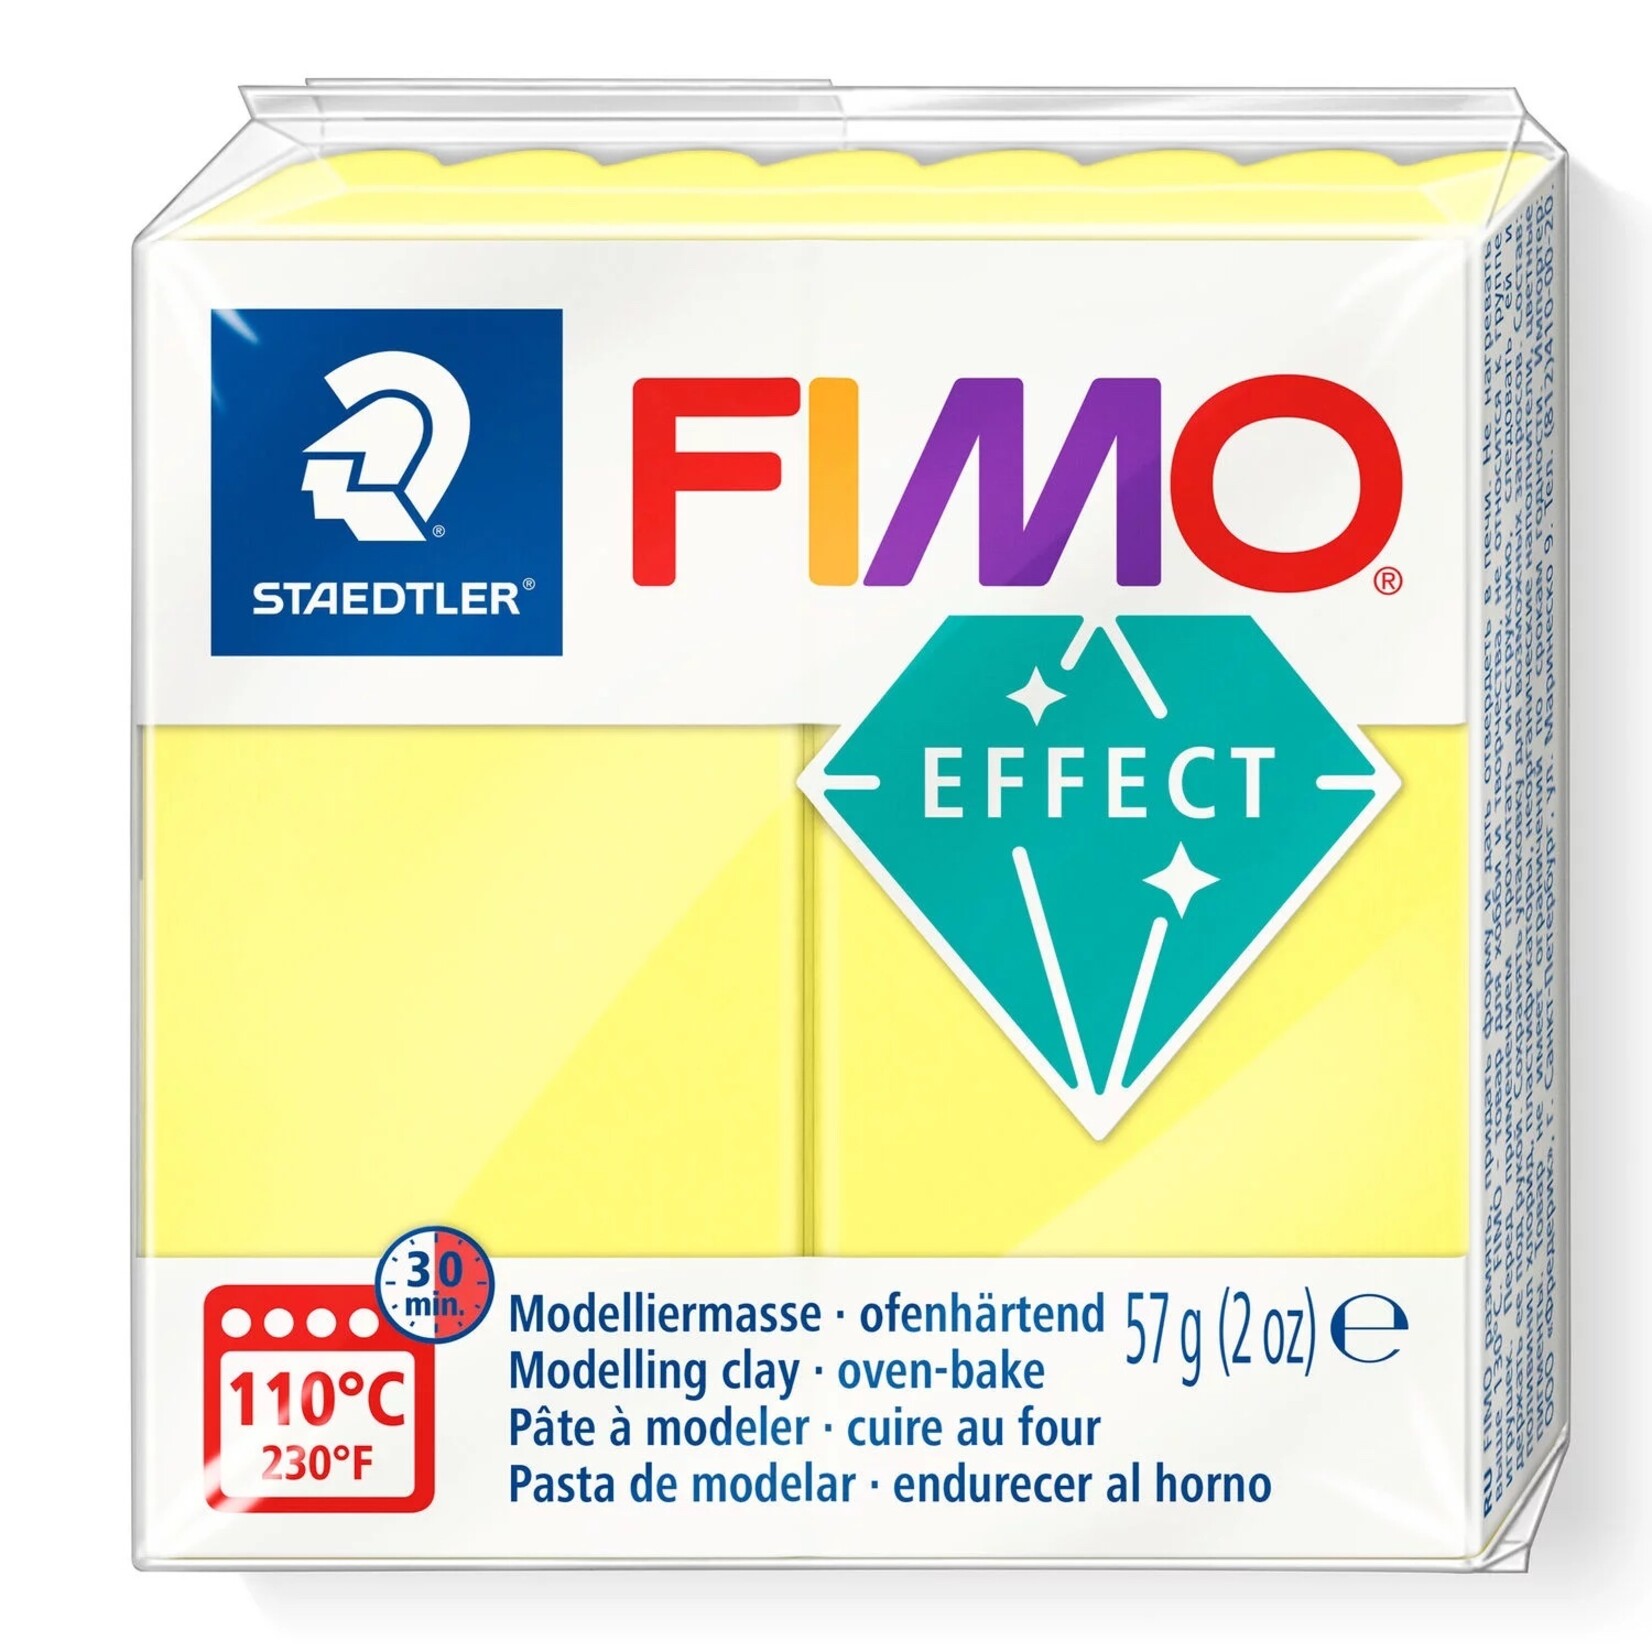 STAEDTLER FIMO EFFECT TRANSLUCENT 104 YELLOW